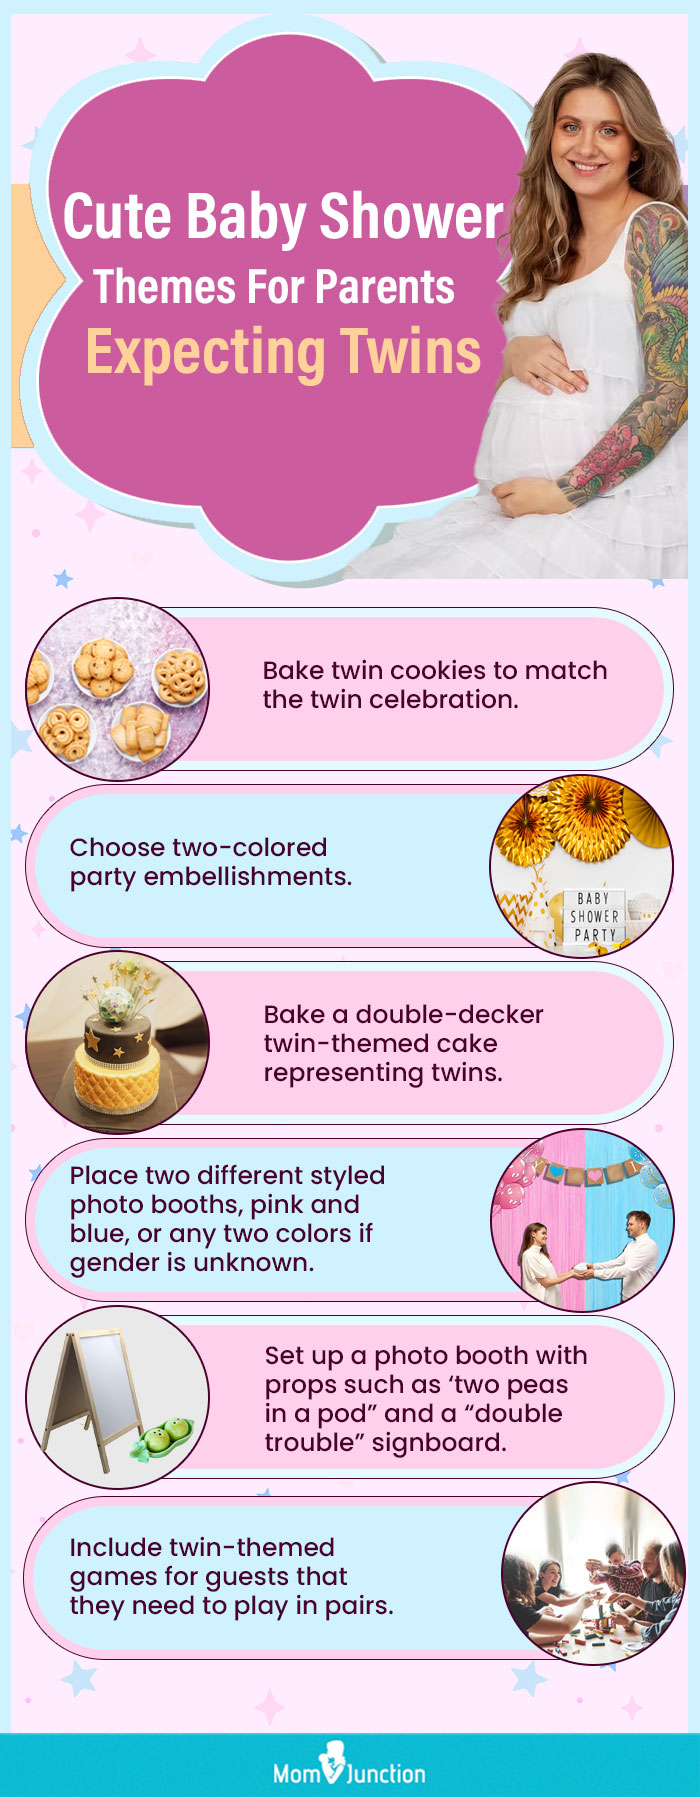 Cute Baby Shower Themes For Parents Expecting Twins (infographic)